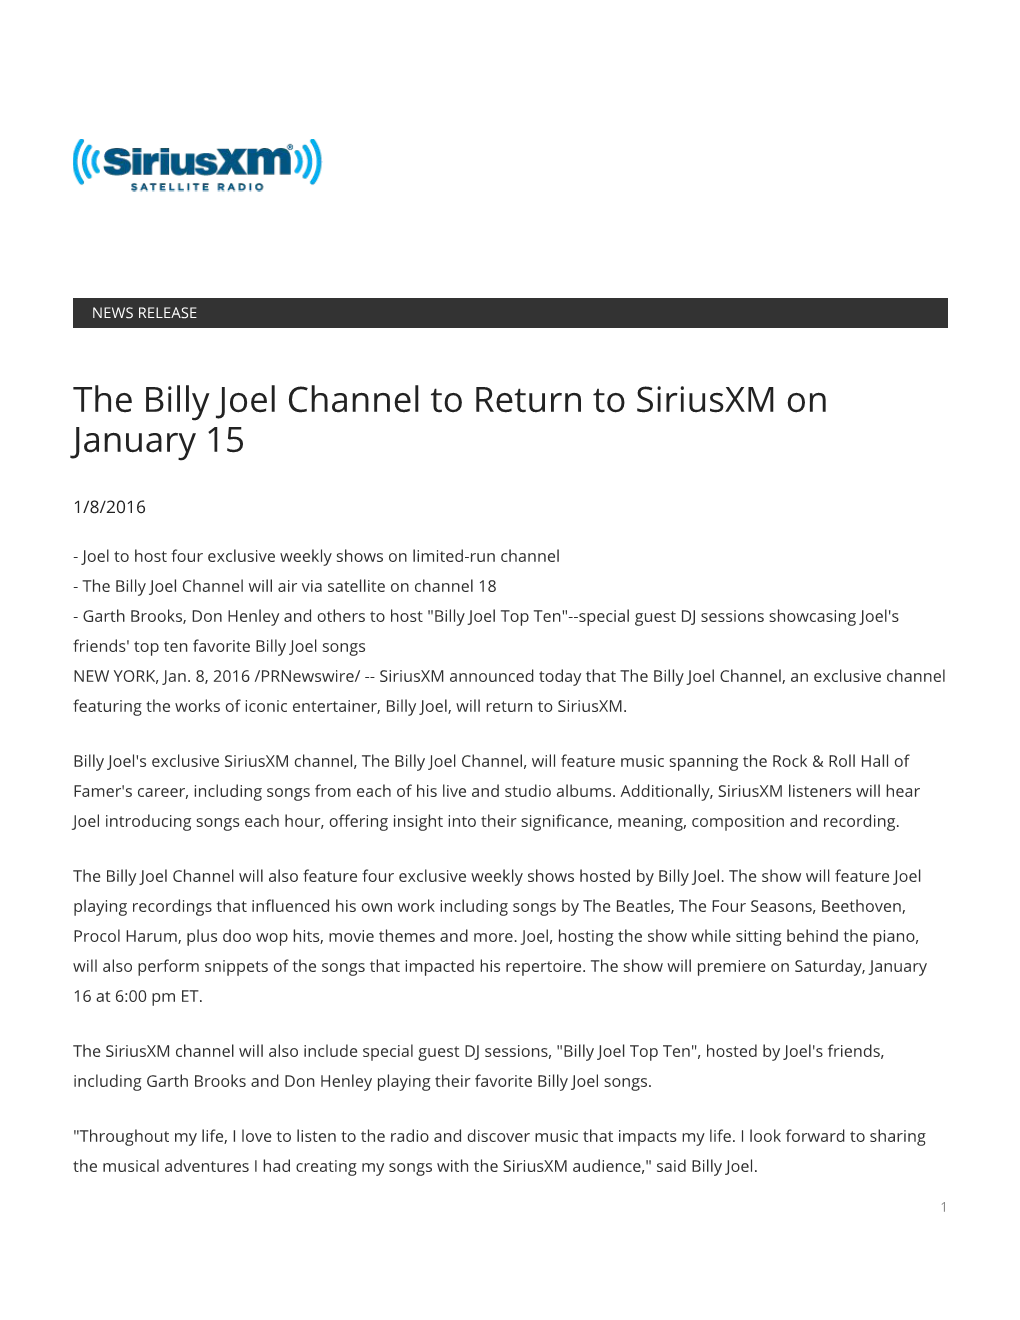 The Billy Joel Channel to Return to Siriusxm on January 15